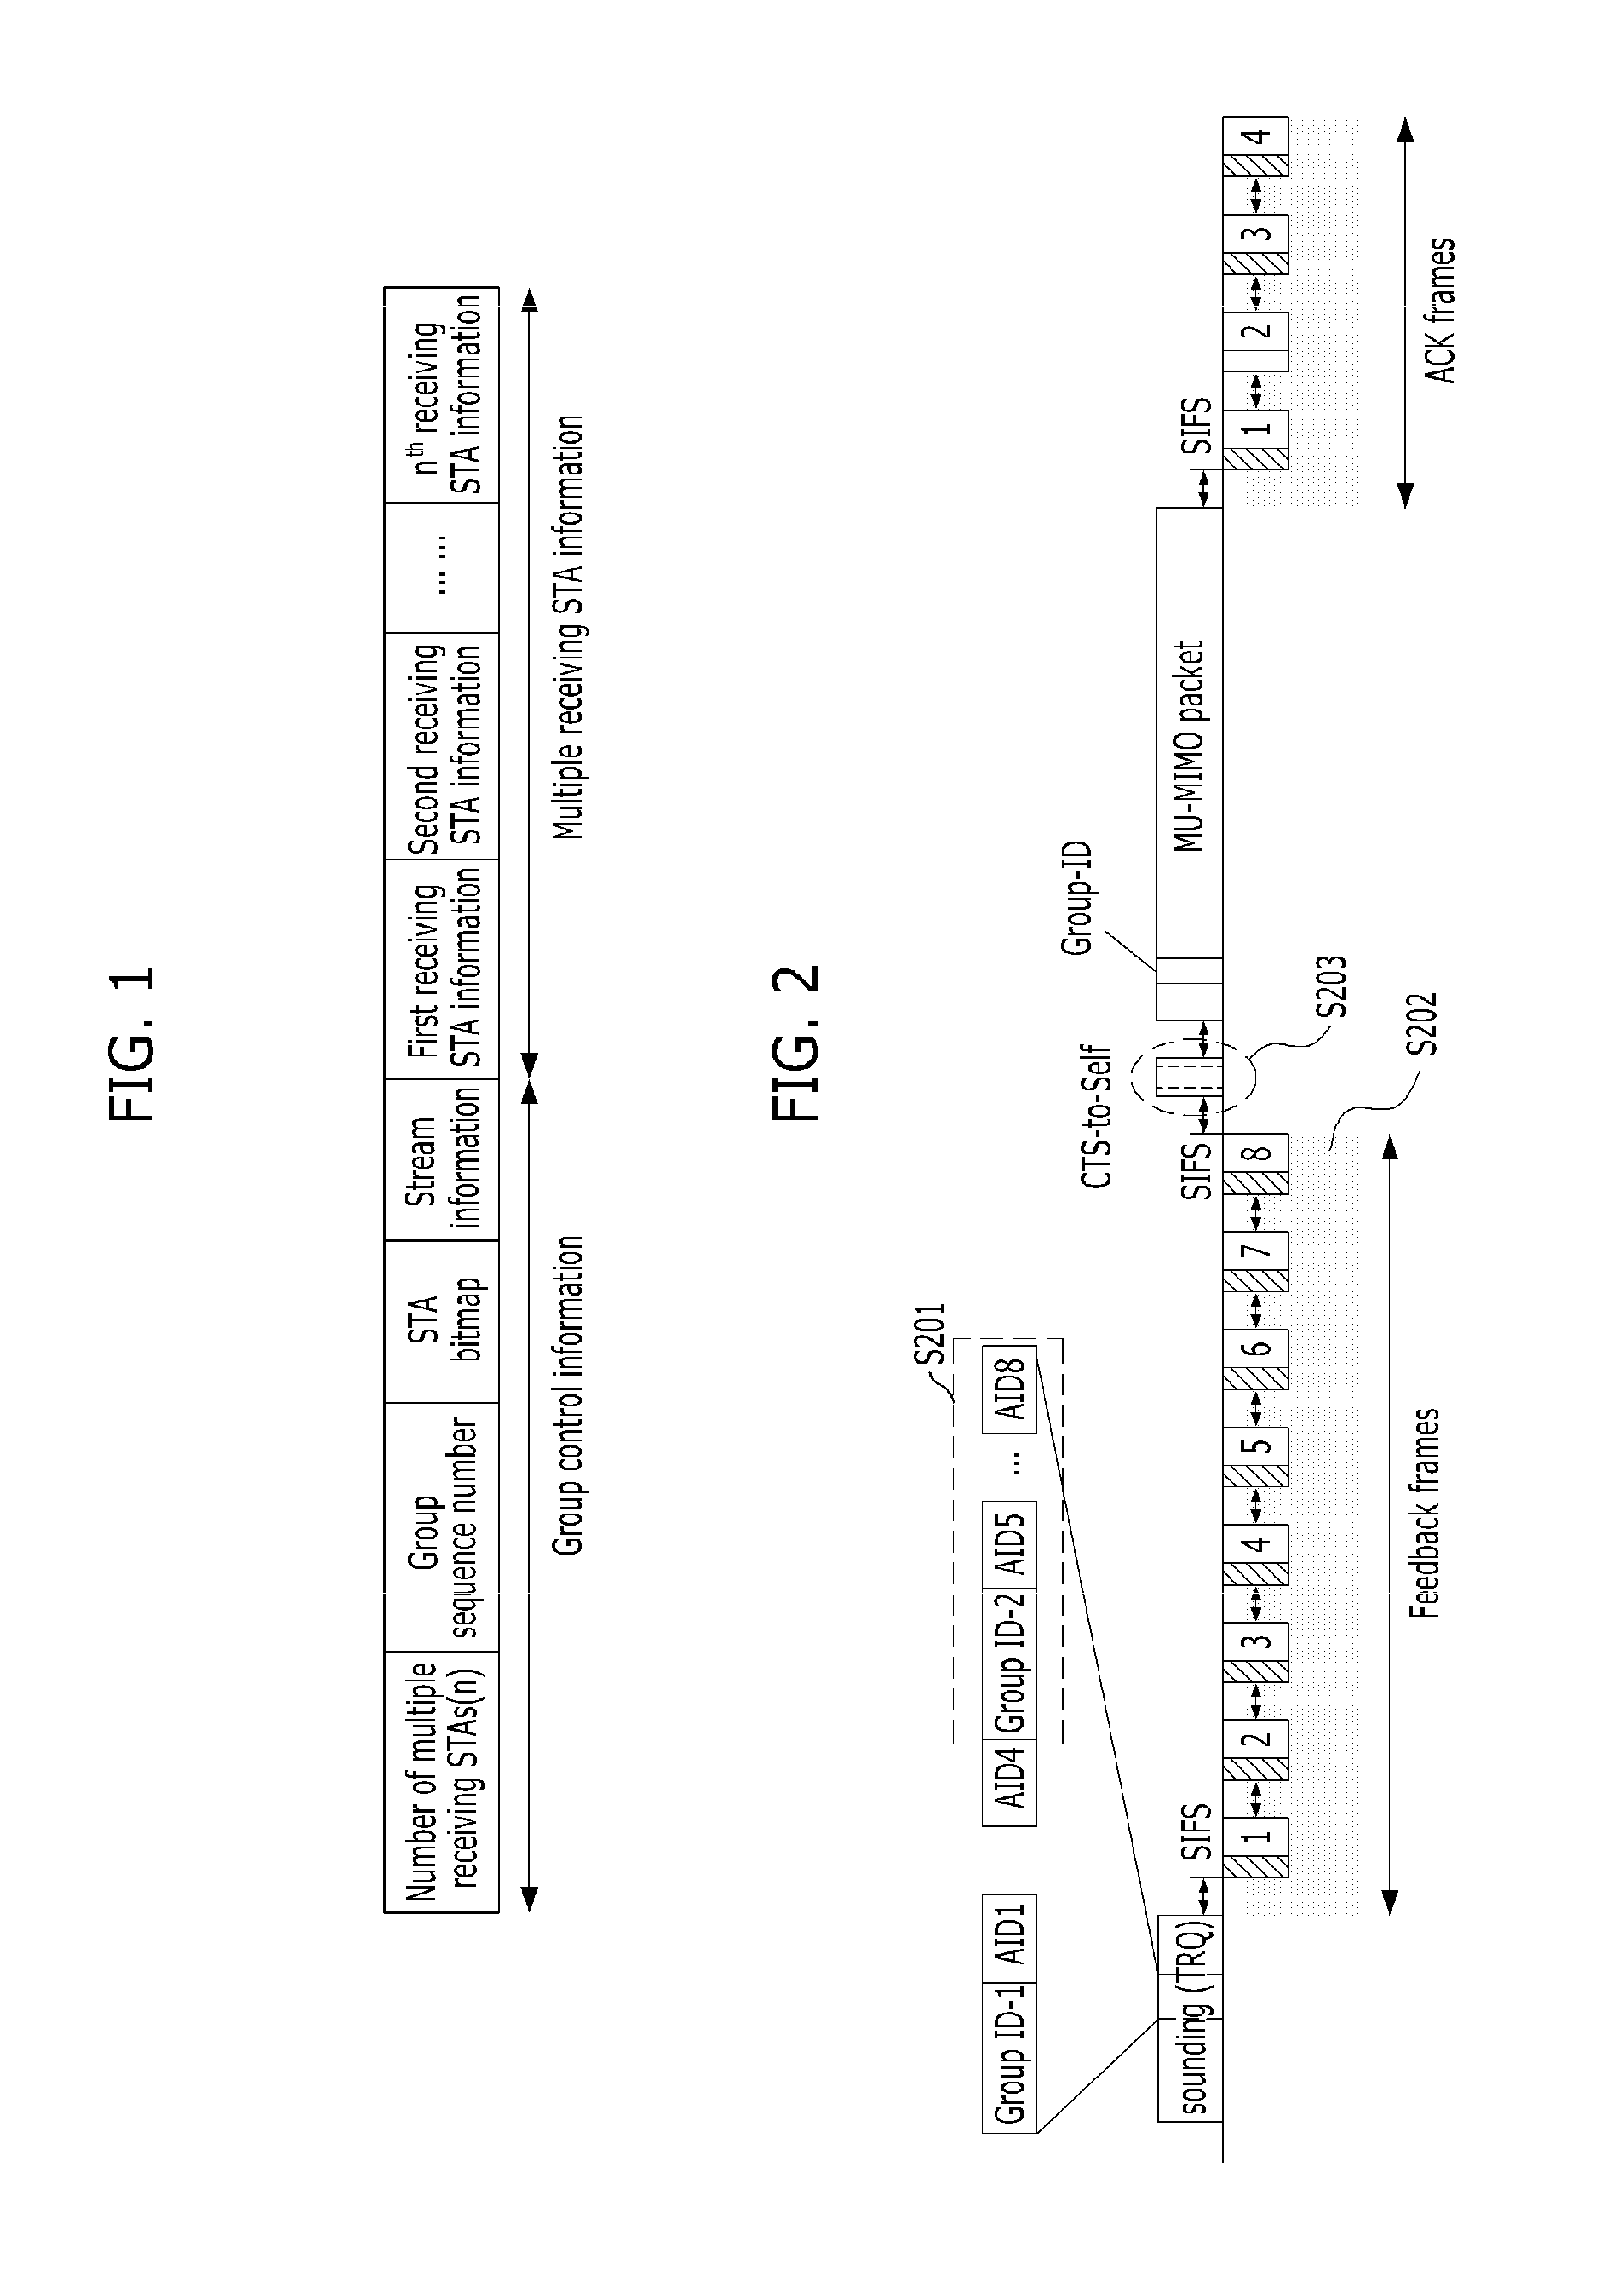 Method for recovering a frame that failed to be transmitted in a mu-mimo based wireless communication system